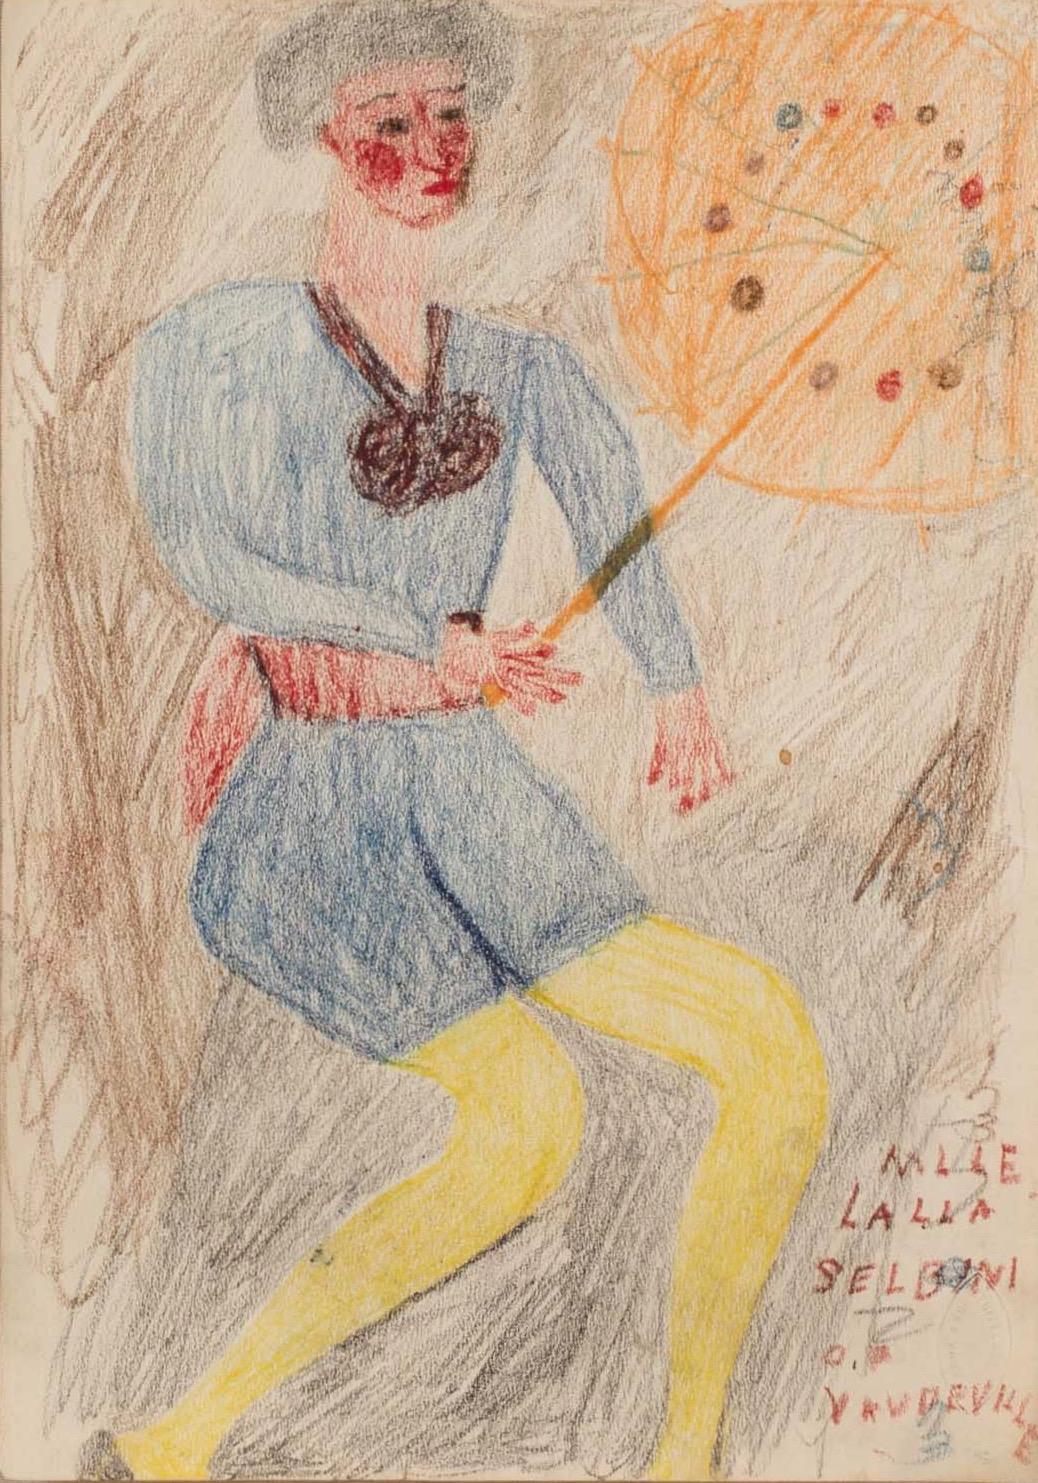 Lalla Selbini of Vaudeville (circa 1917-1922) Self-taught, Outsider Art - Mixed Media Art by Justin McCarthy